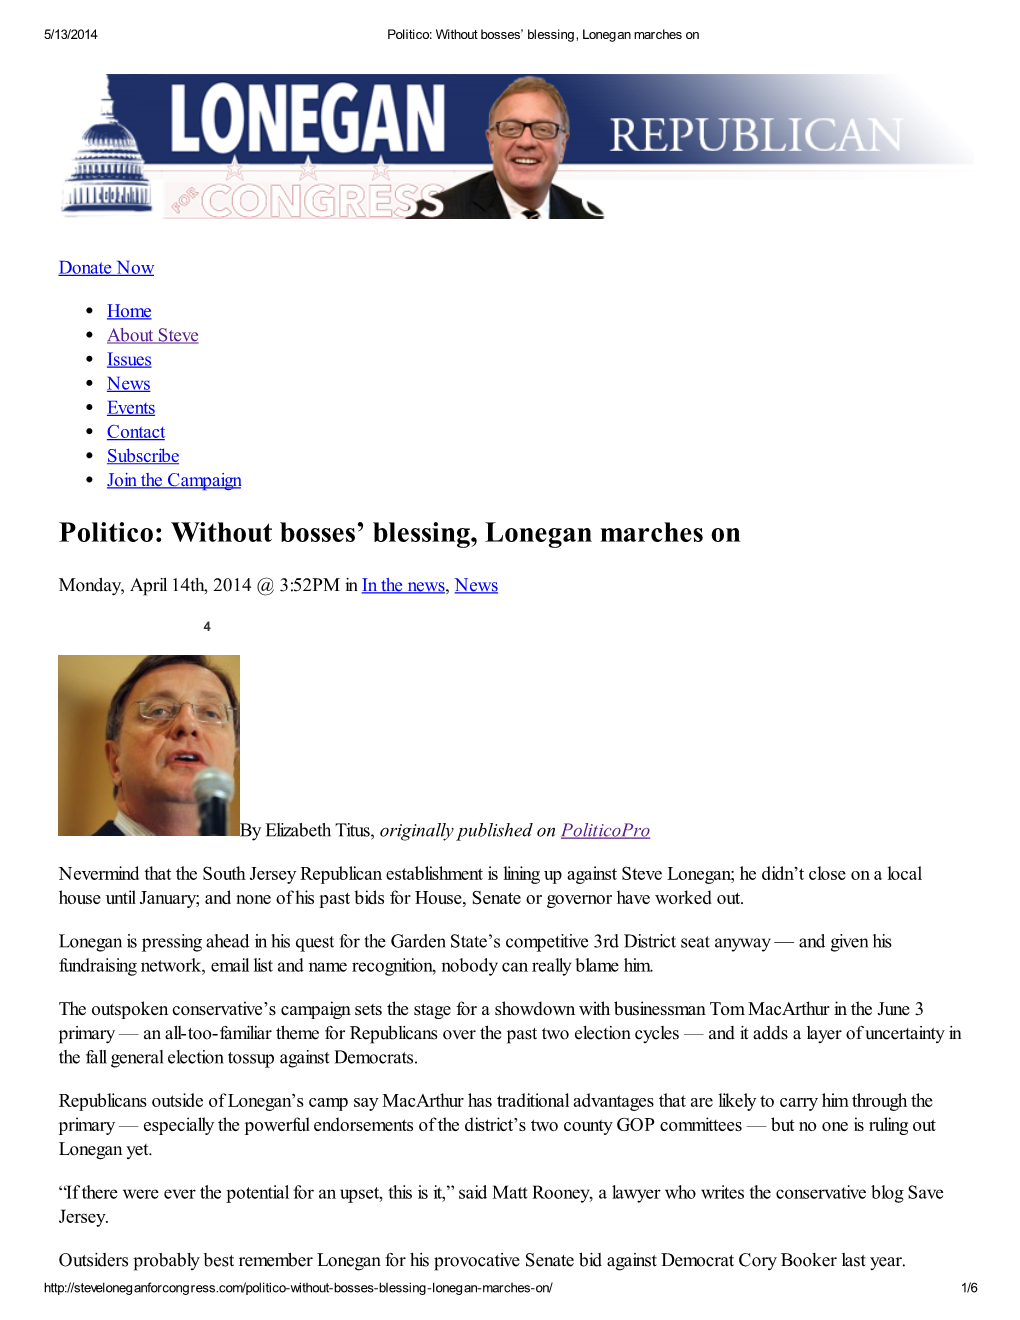 Politico: Without Bosses' Blessing, Lonegan Marches On